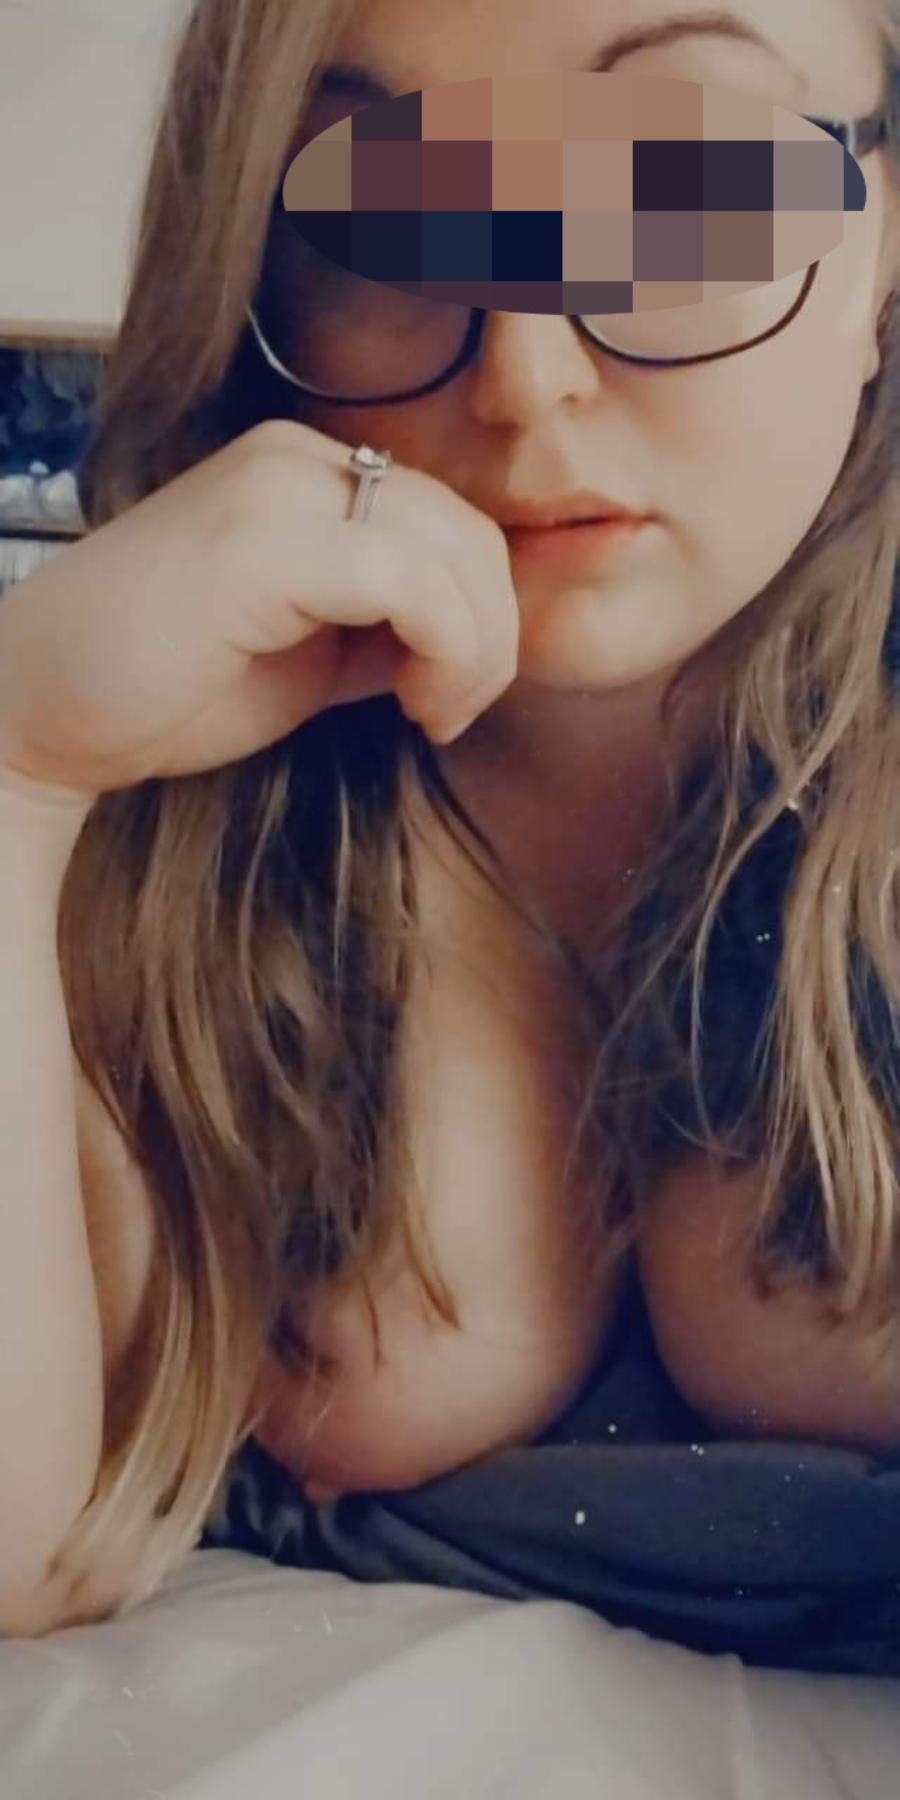 Curvy Woman with Glasses, Blurred out eyes with Big Bare Boobs 